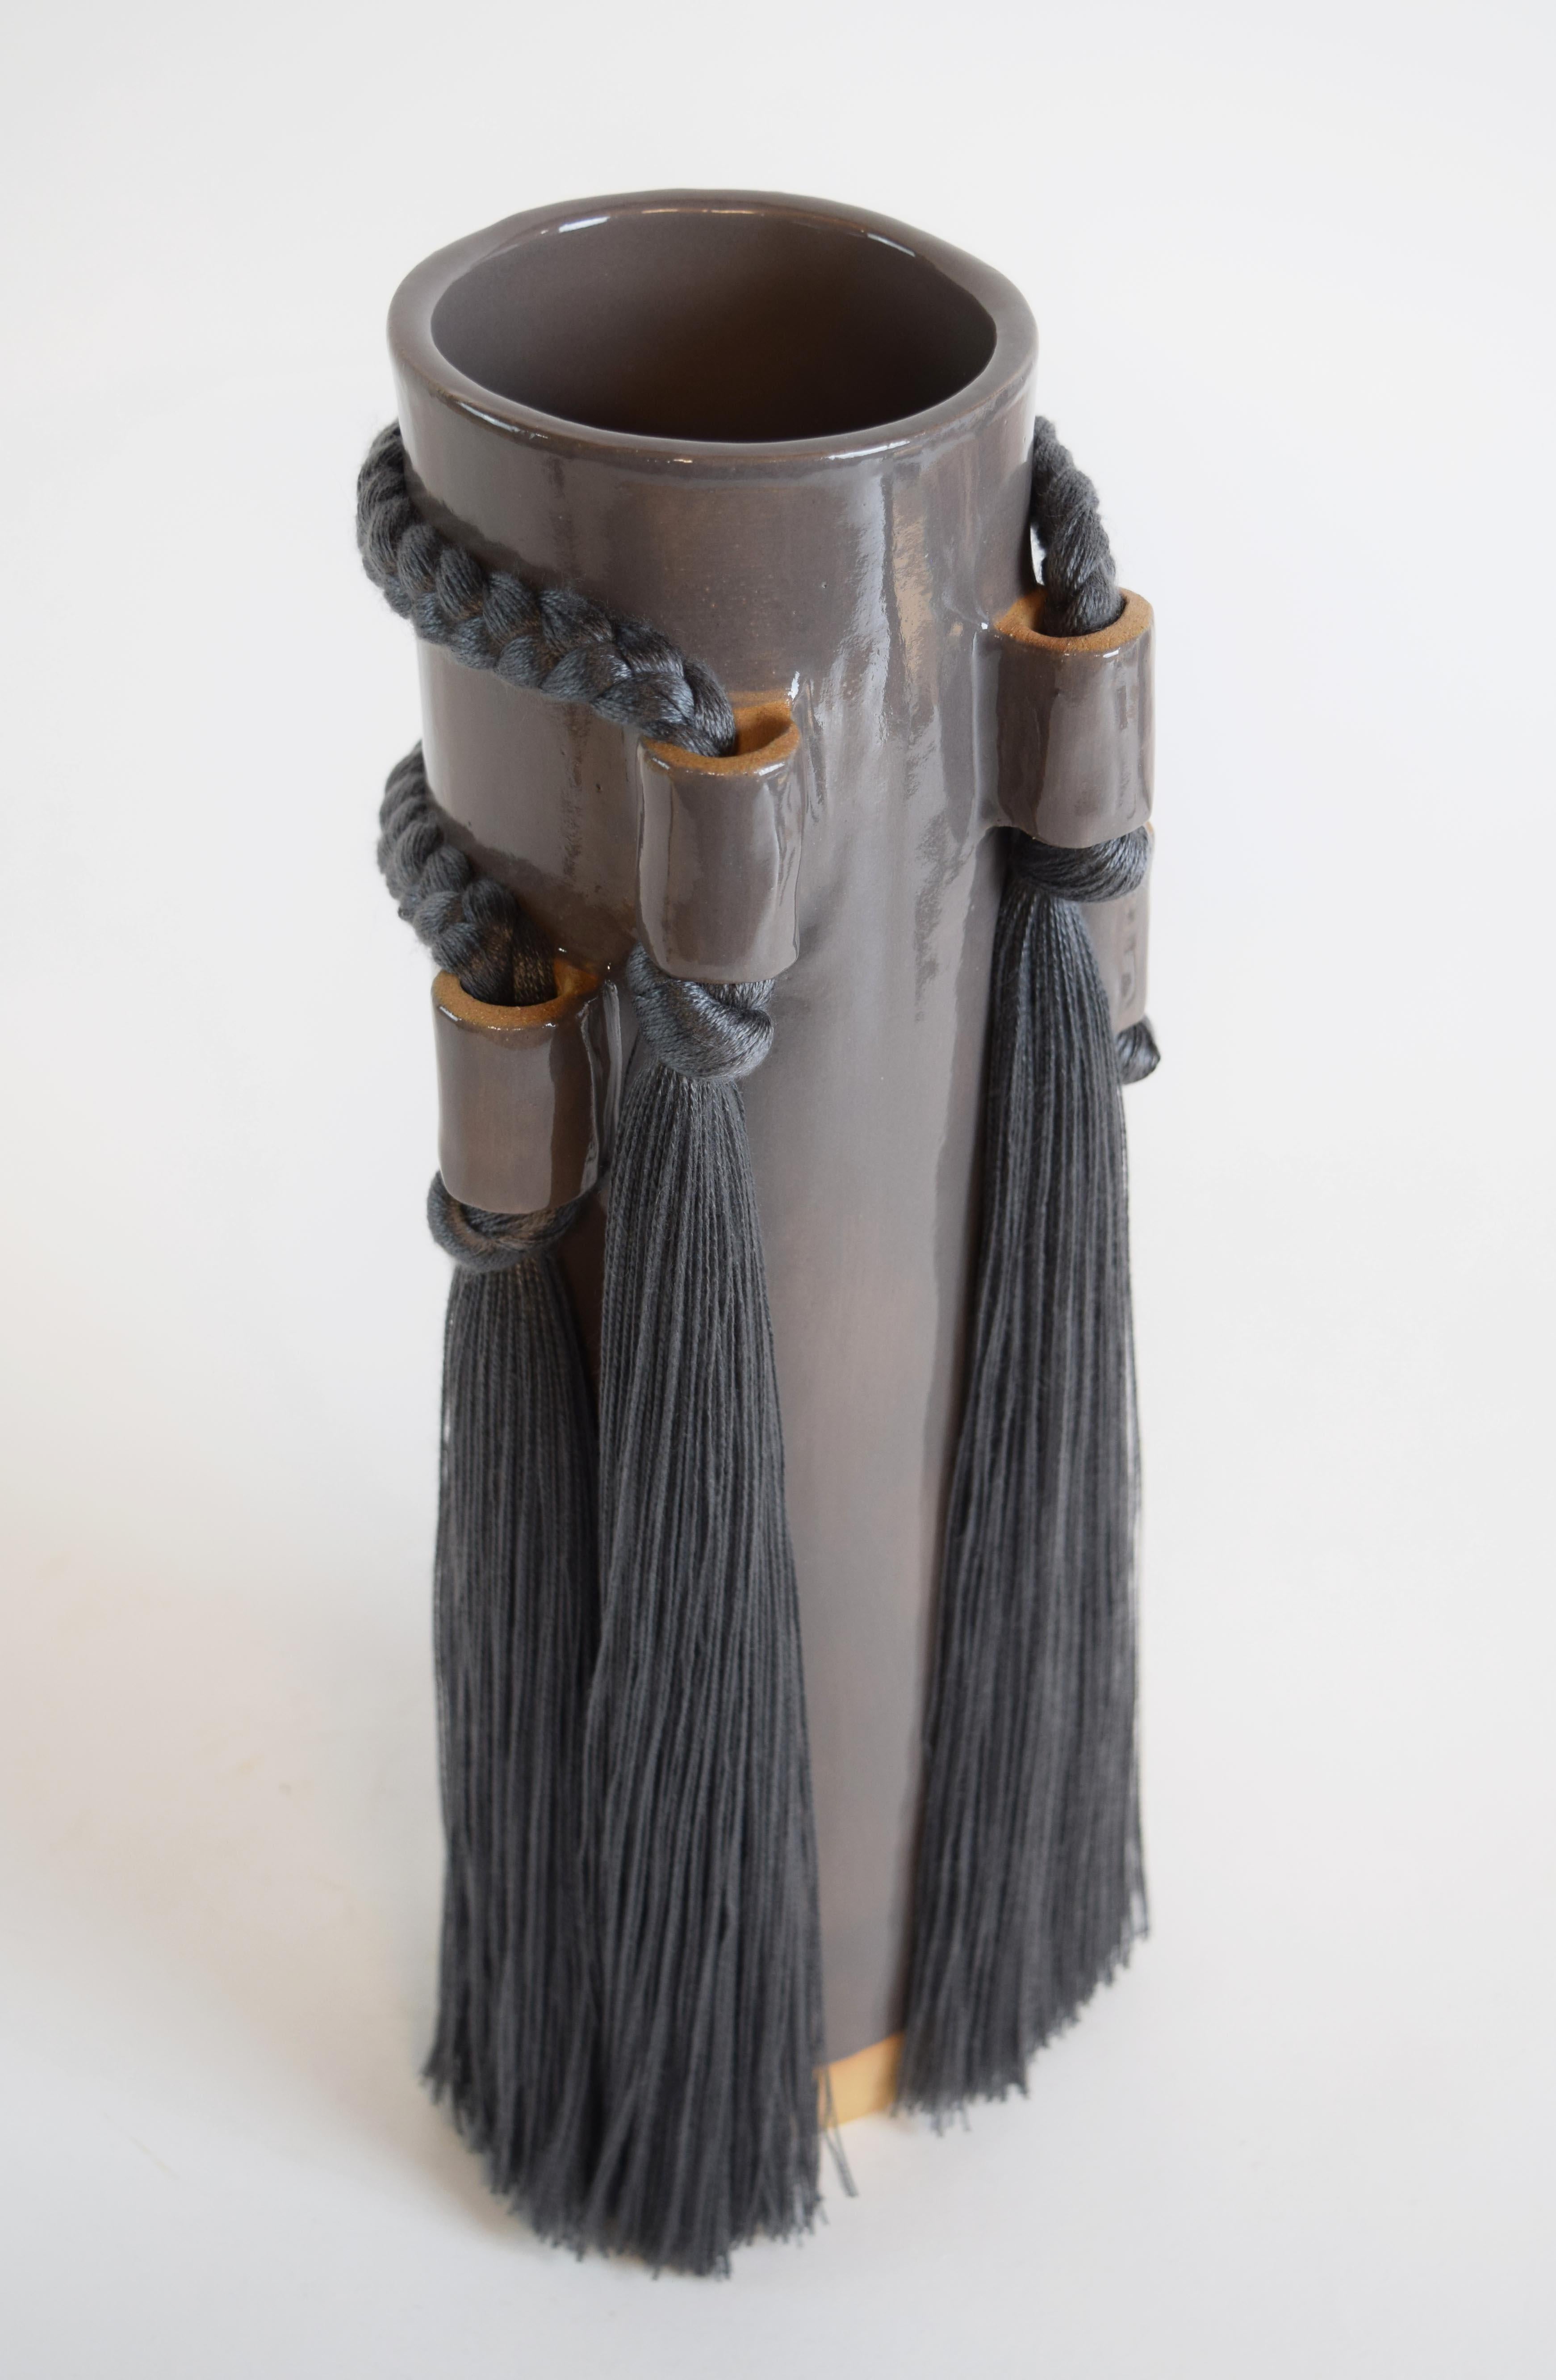 Vase #703 by Karen Gayle Tinney

Featuring fringe and braided details from all views, this vase is sized to hold a large arrangement of flowers or to stand alone as a sculptural piece.

Hand formed stoneware with charcoal glaze. Charcoal tencel